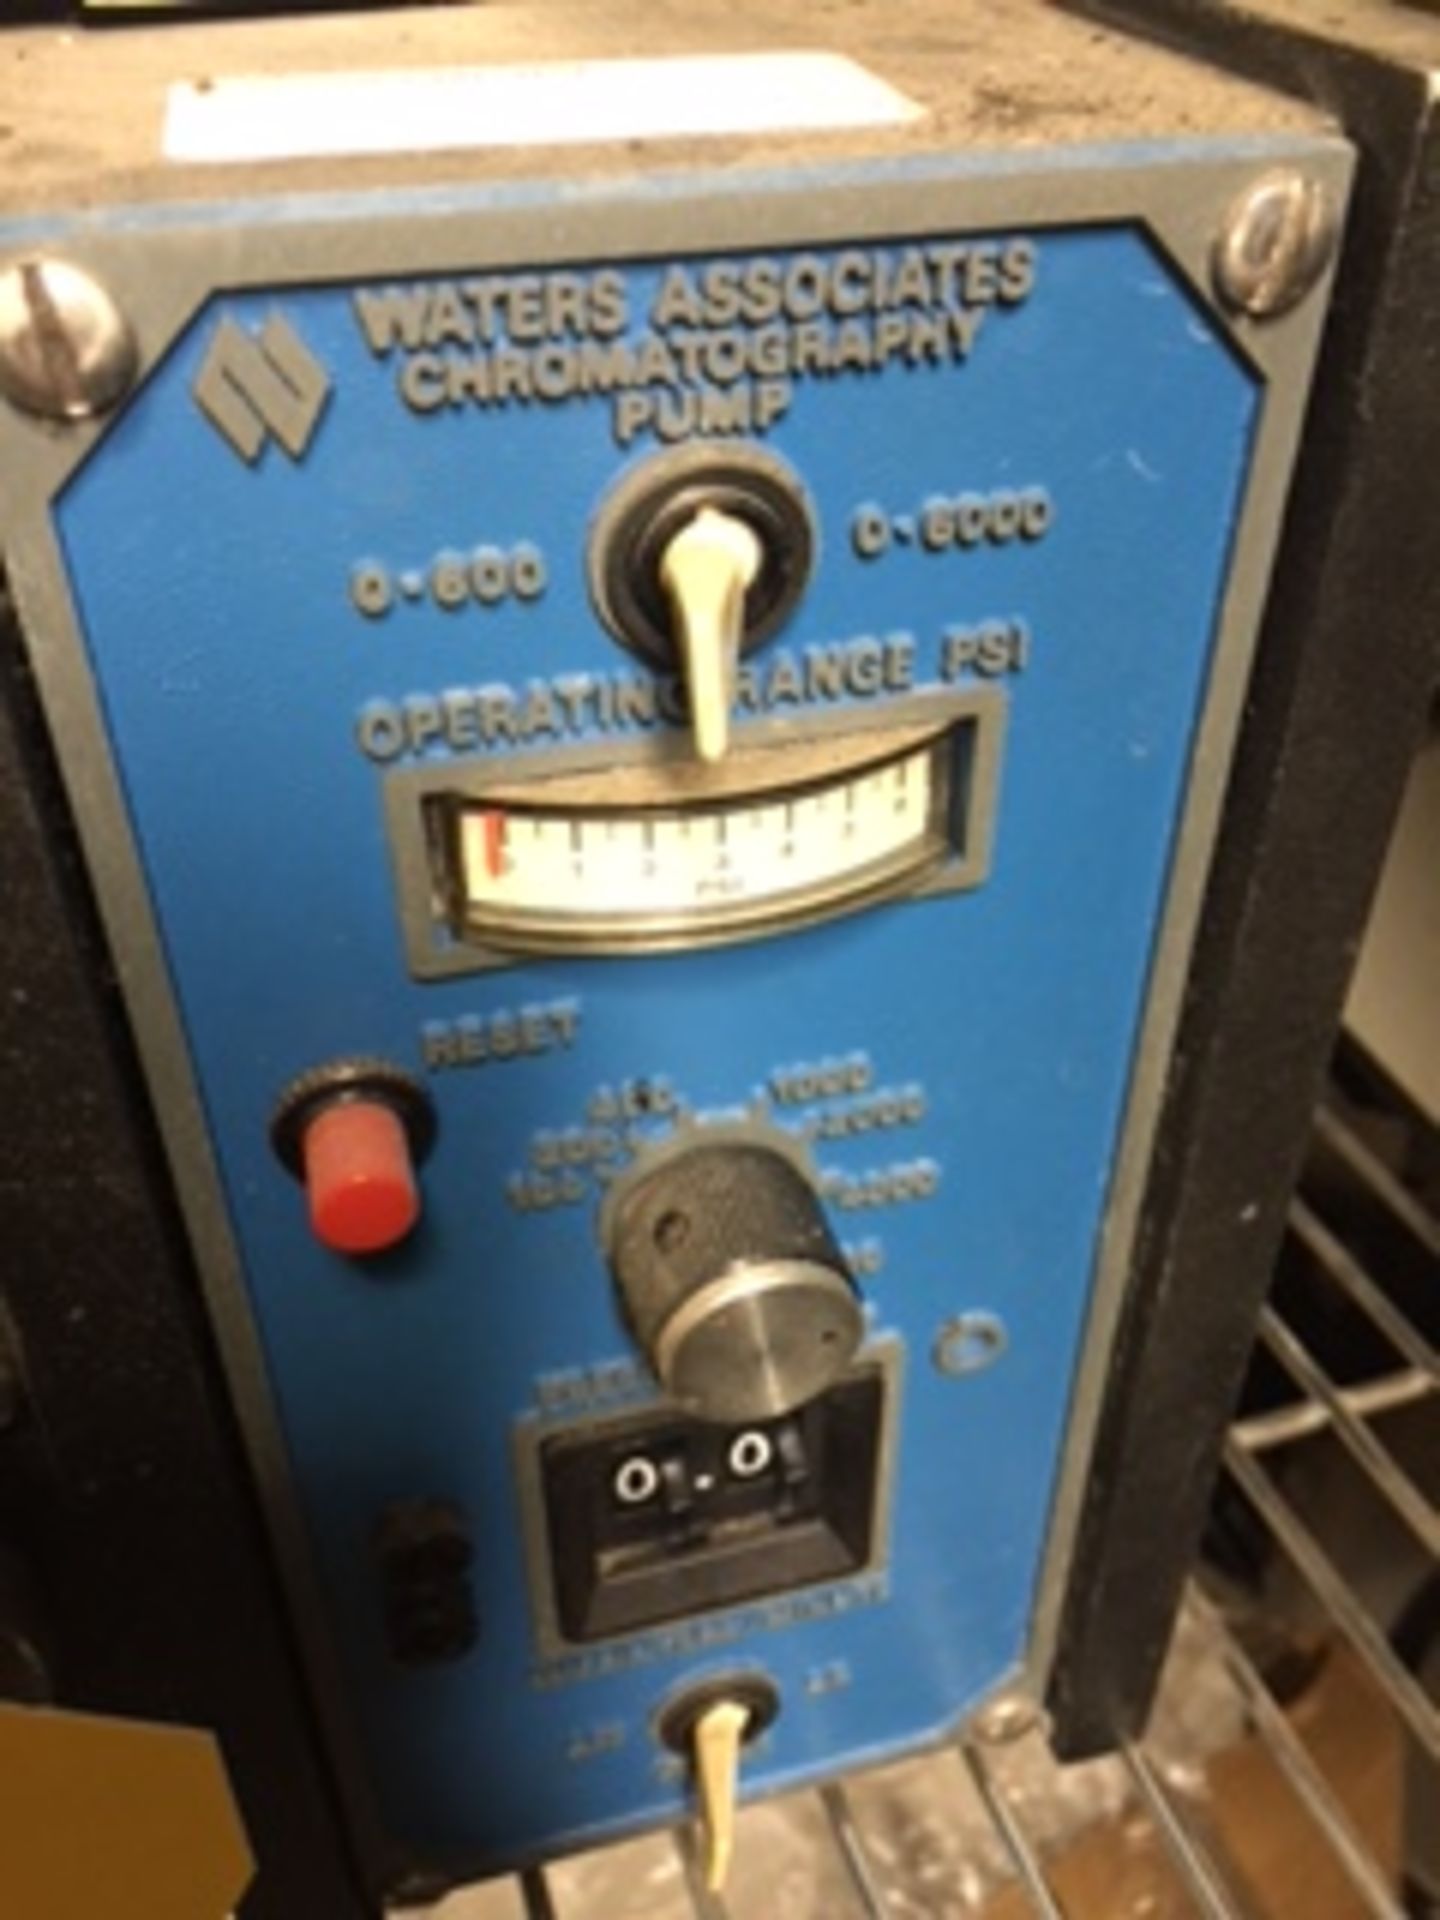 Waters Associates Chromatography, Model #M-6000A - Image 2 of 2